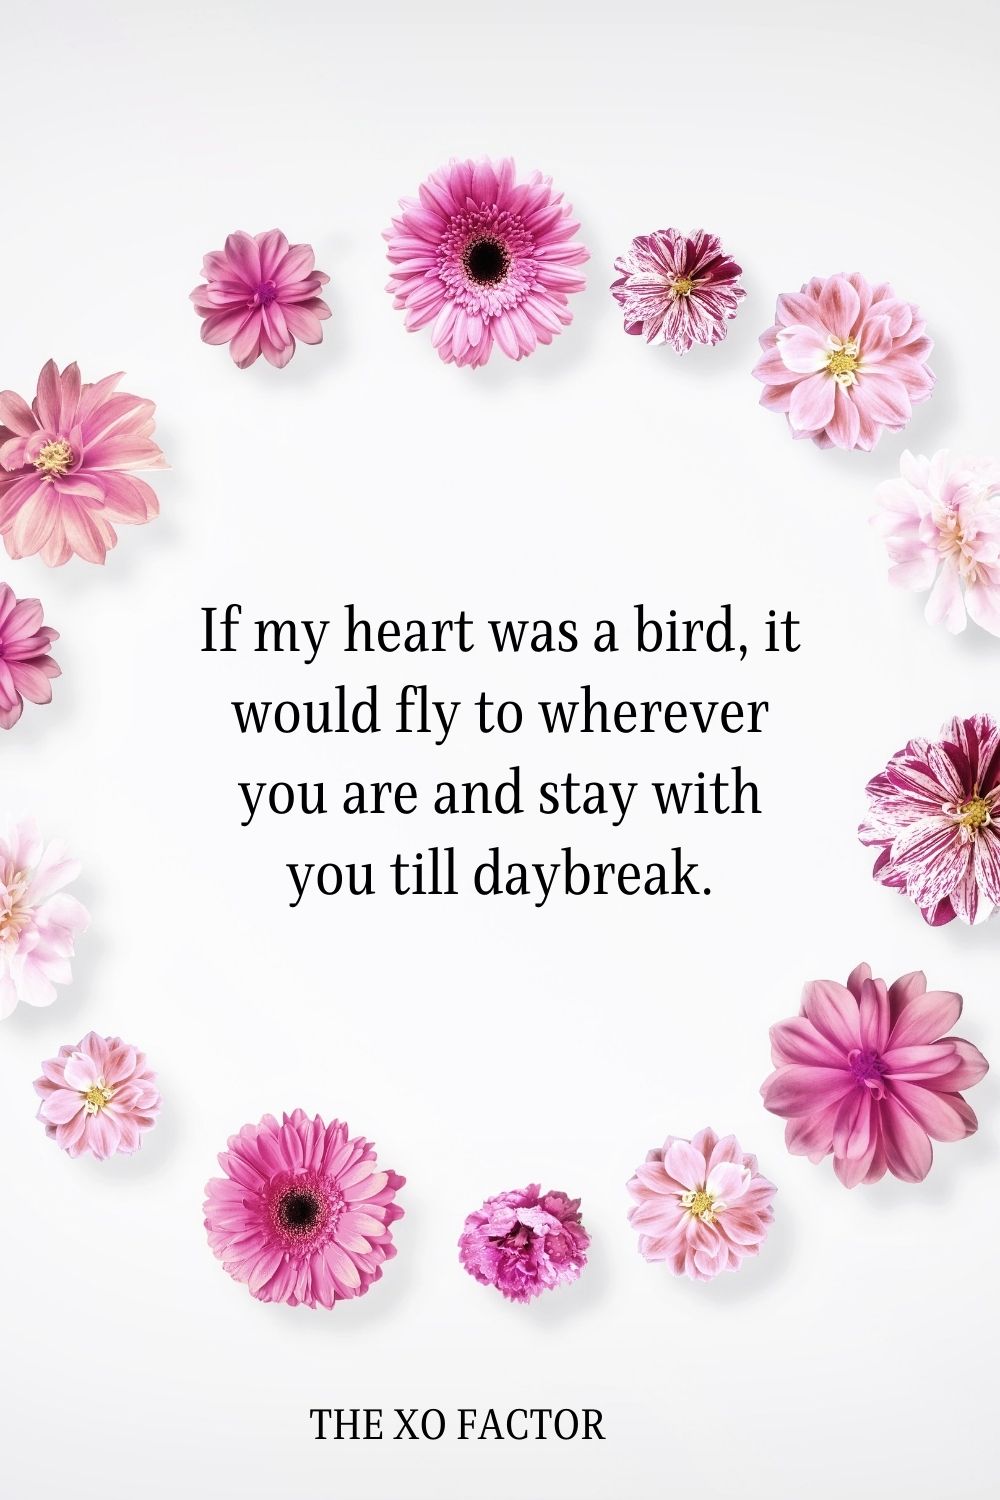 If my heart was a bird, it would fly to wherever you are and stay with you till daybreak.